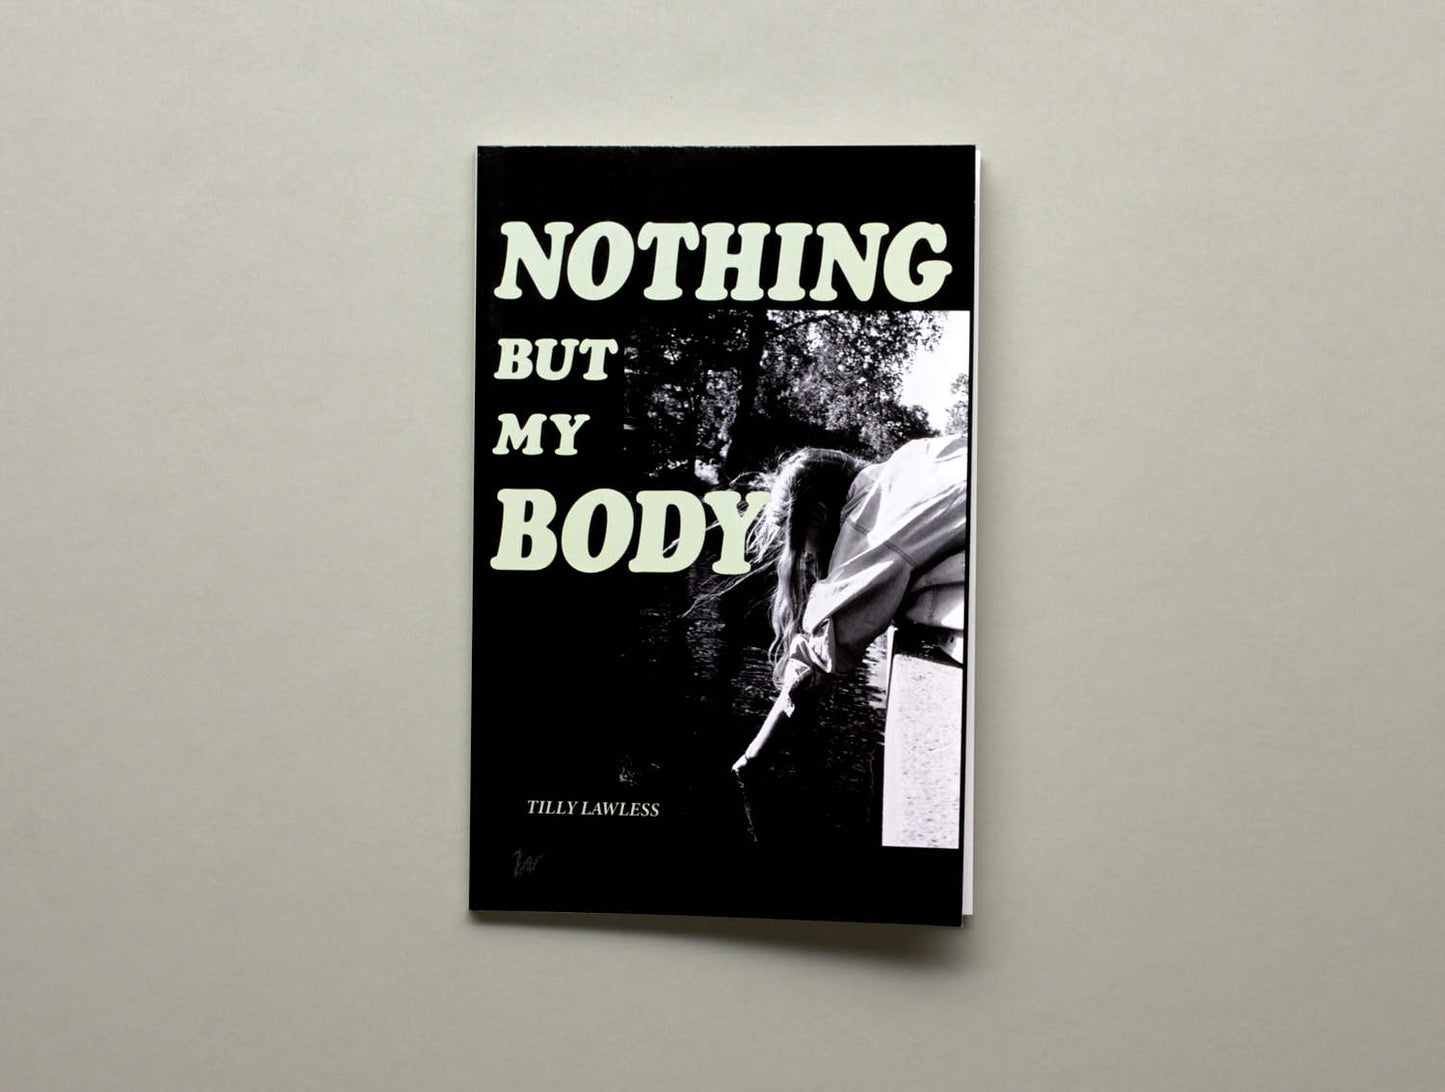 Tilly Lawless, Nothing But My Body